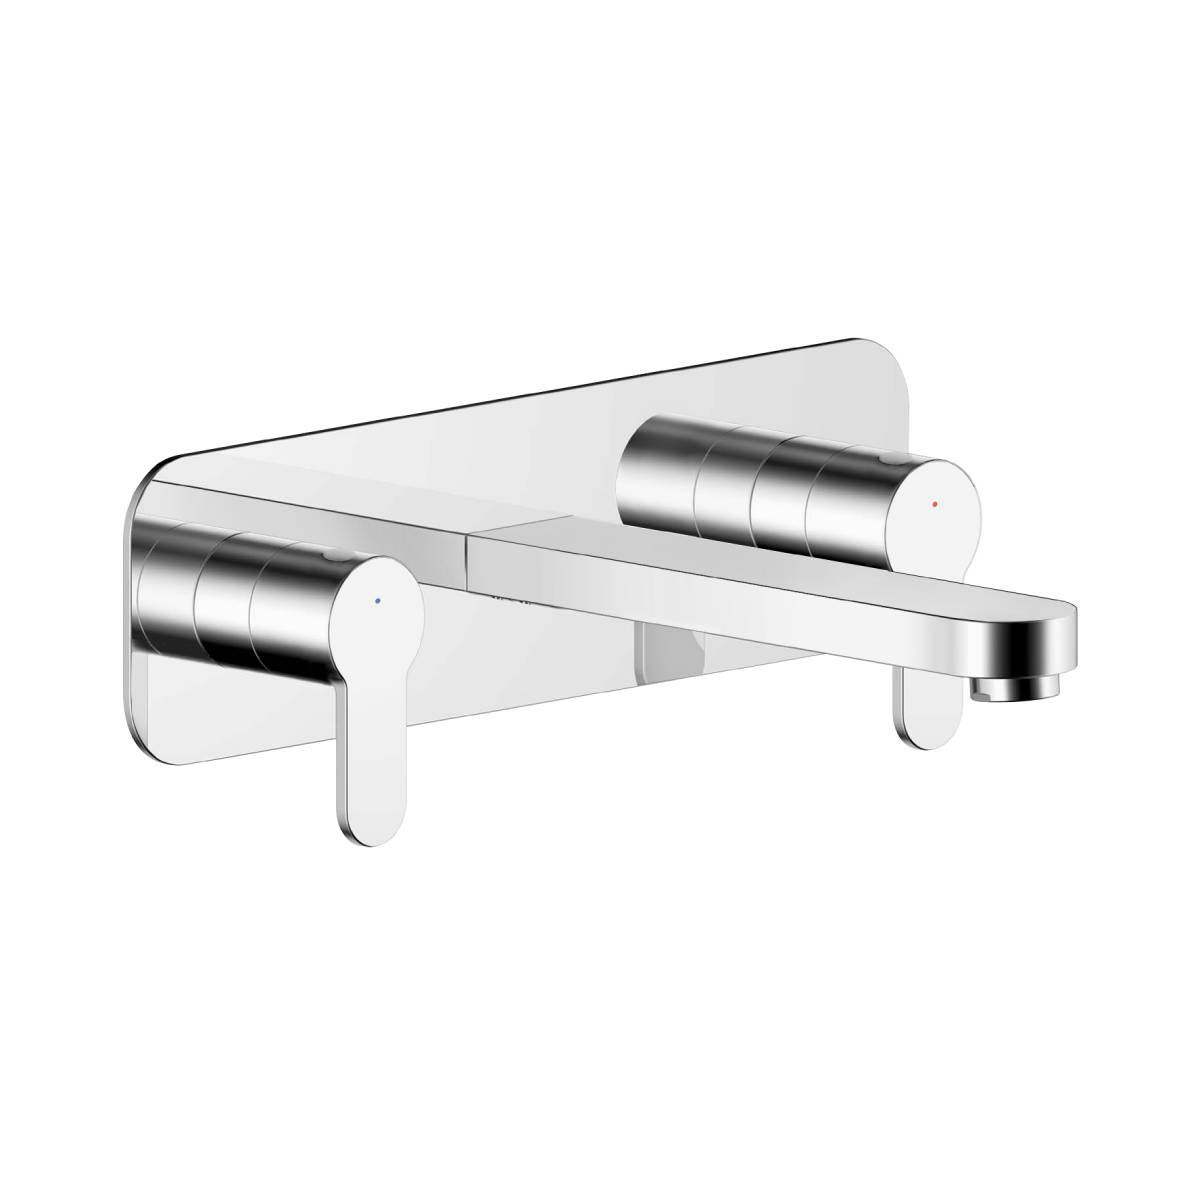 Nuie Arvan Wall Mounted 3 Hole Basin Mixer with Plate ARV350 (13530)